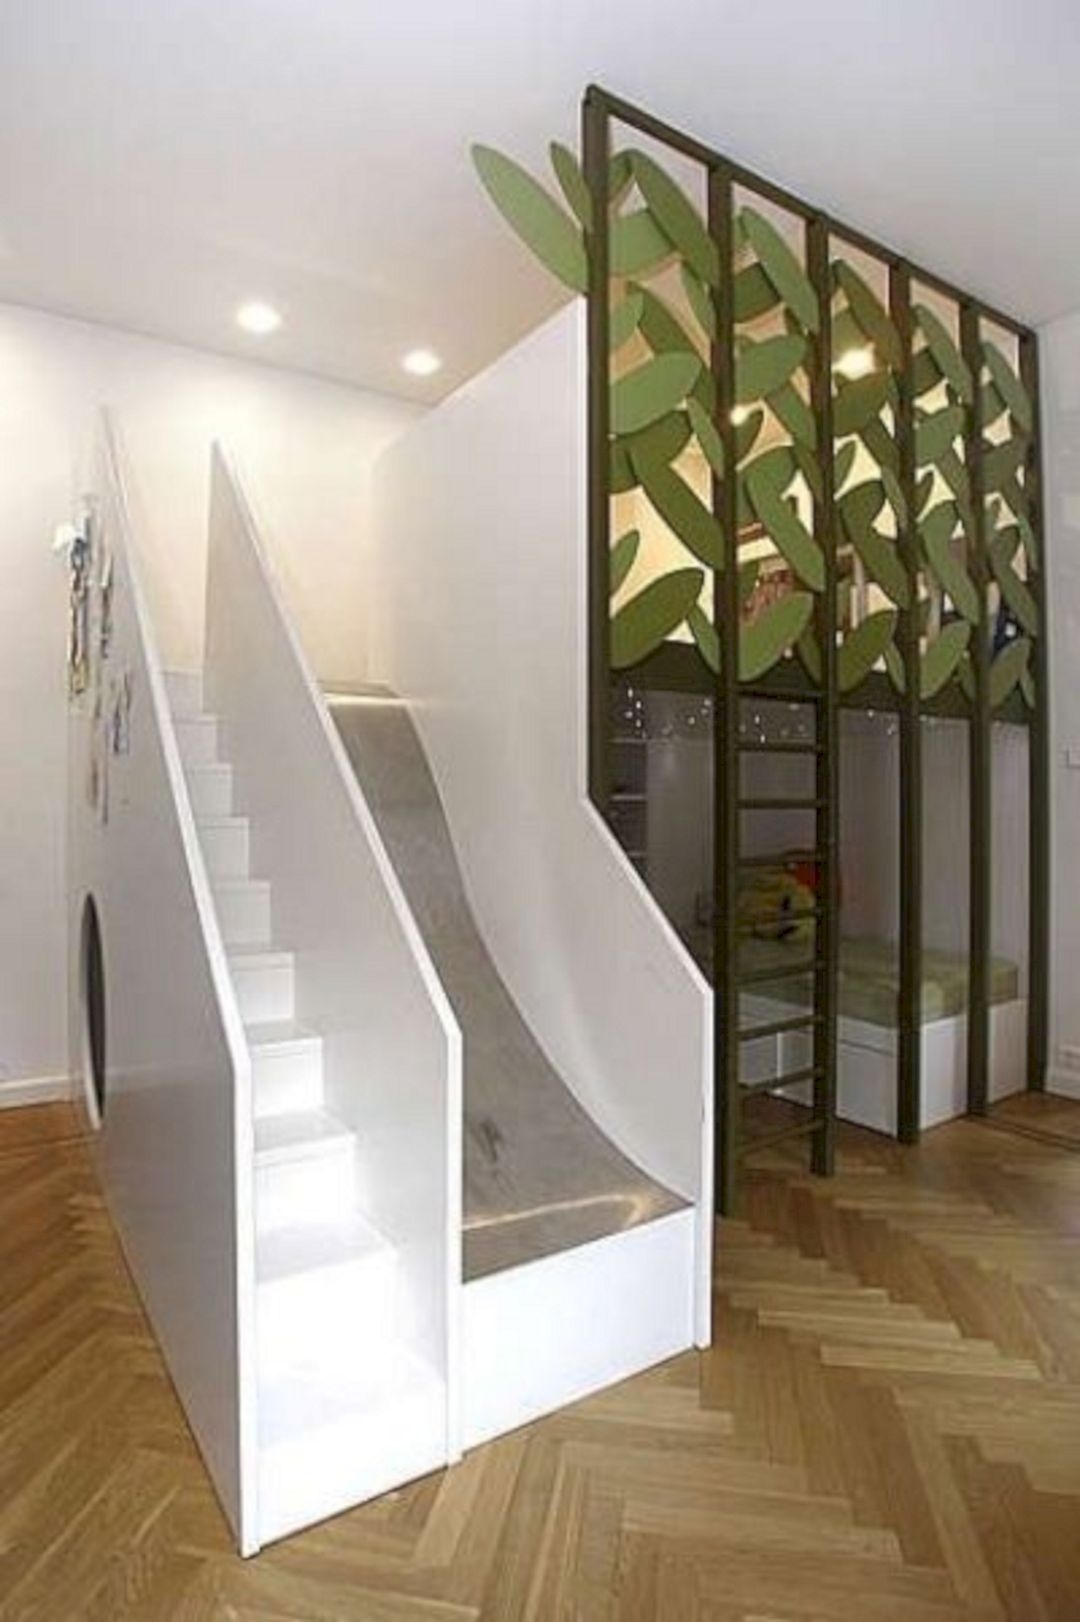 bunk bed with slide and stairs